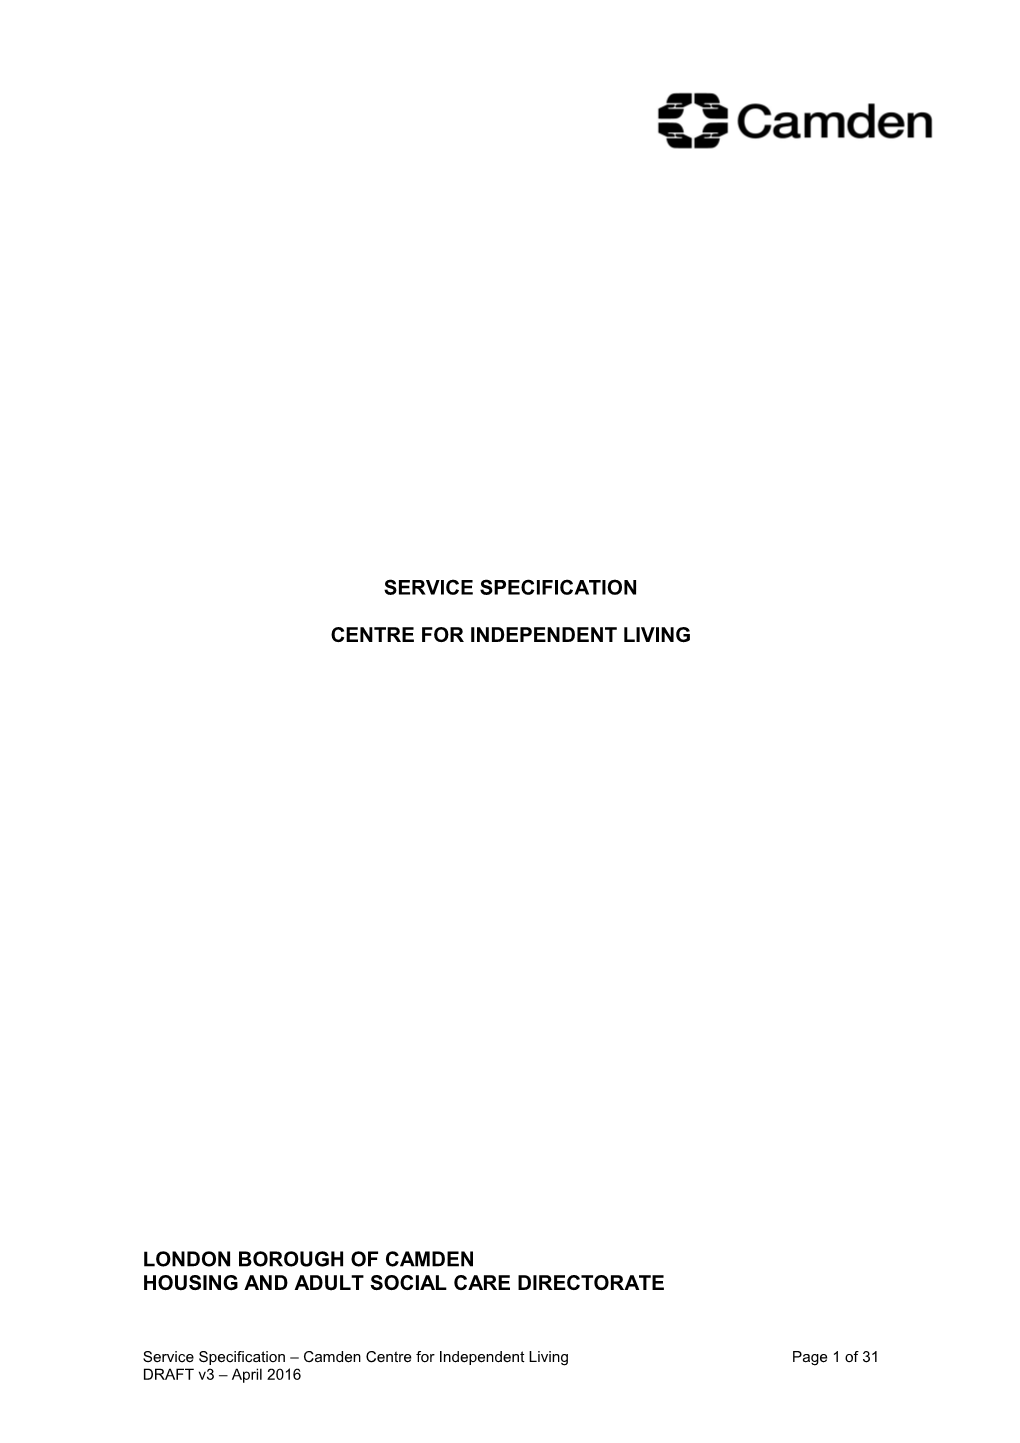 CSF Service Specification Template 09/10